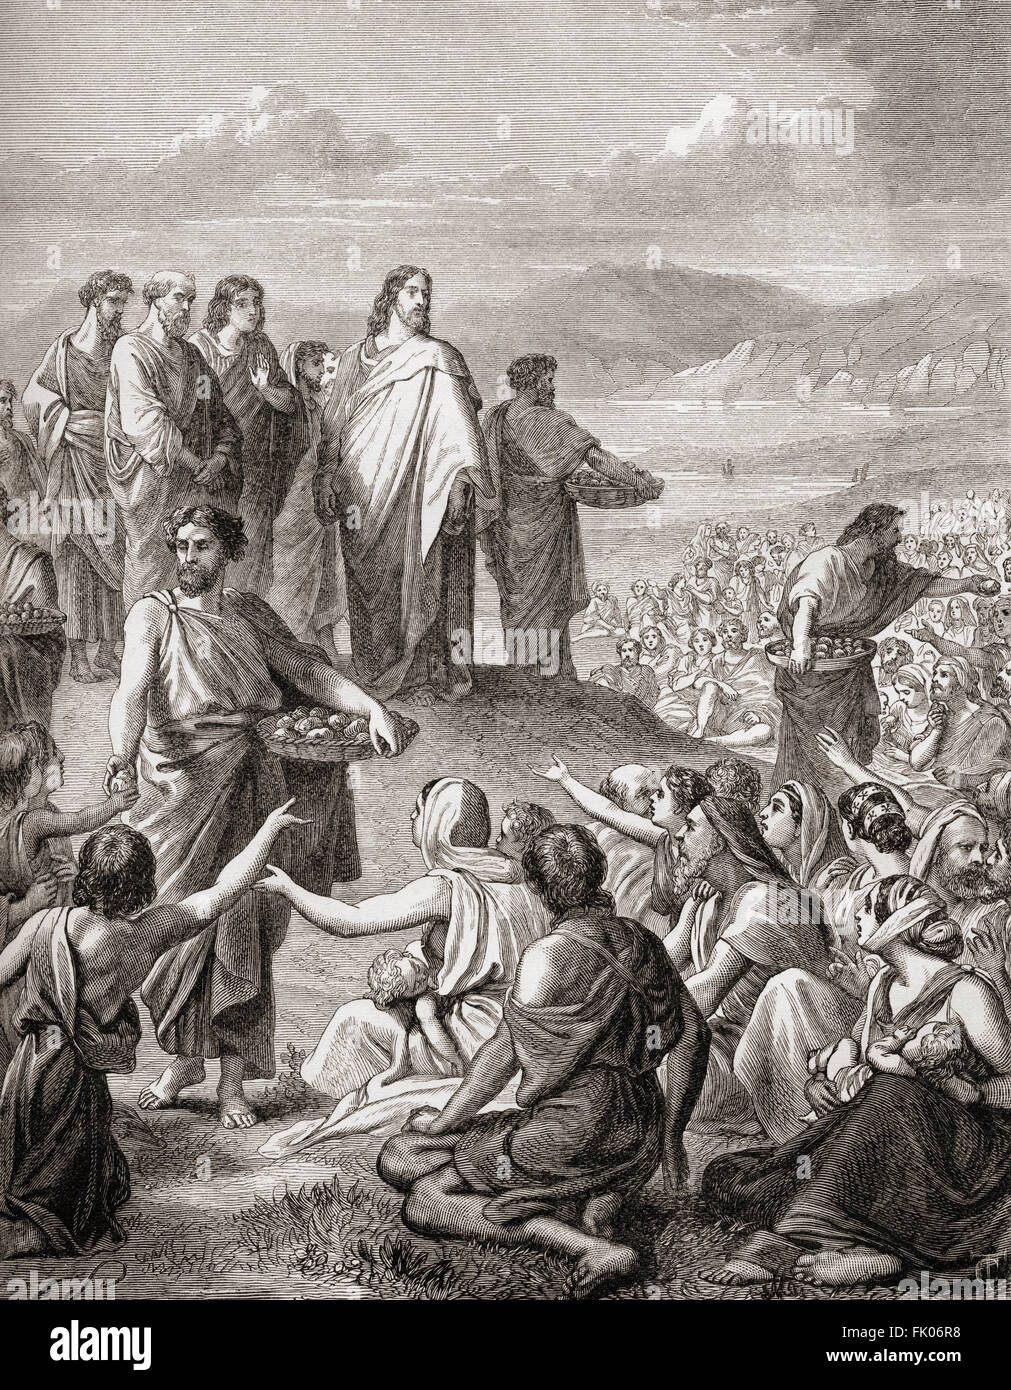 Jesus feeding the multitude.  The miracle of the five loaves and two fish, or perhaps the miracle of the seven loaves and fish.  From The Gospels, New Testament. Stock Photo